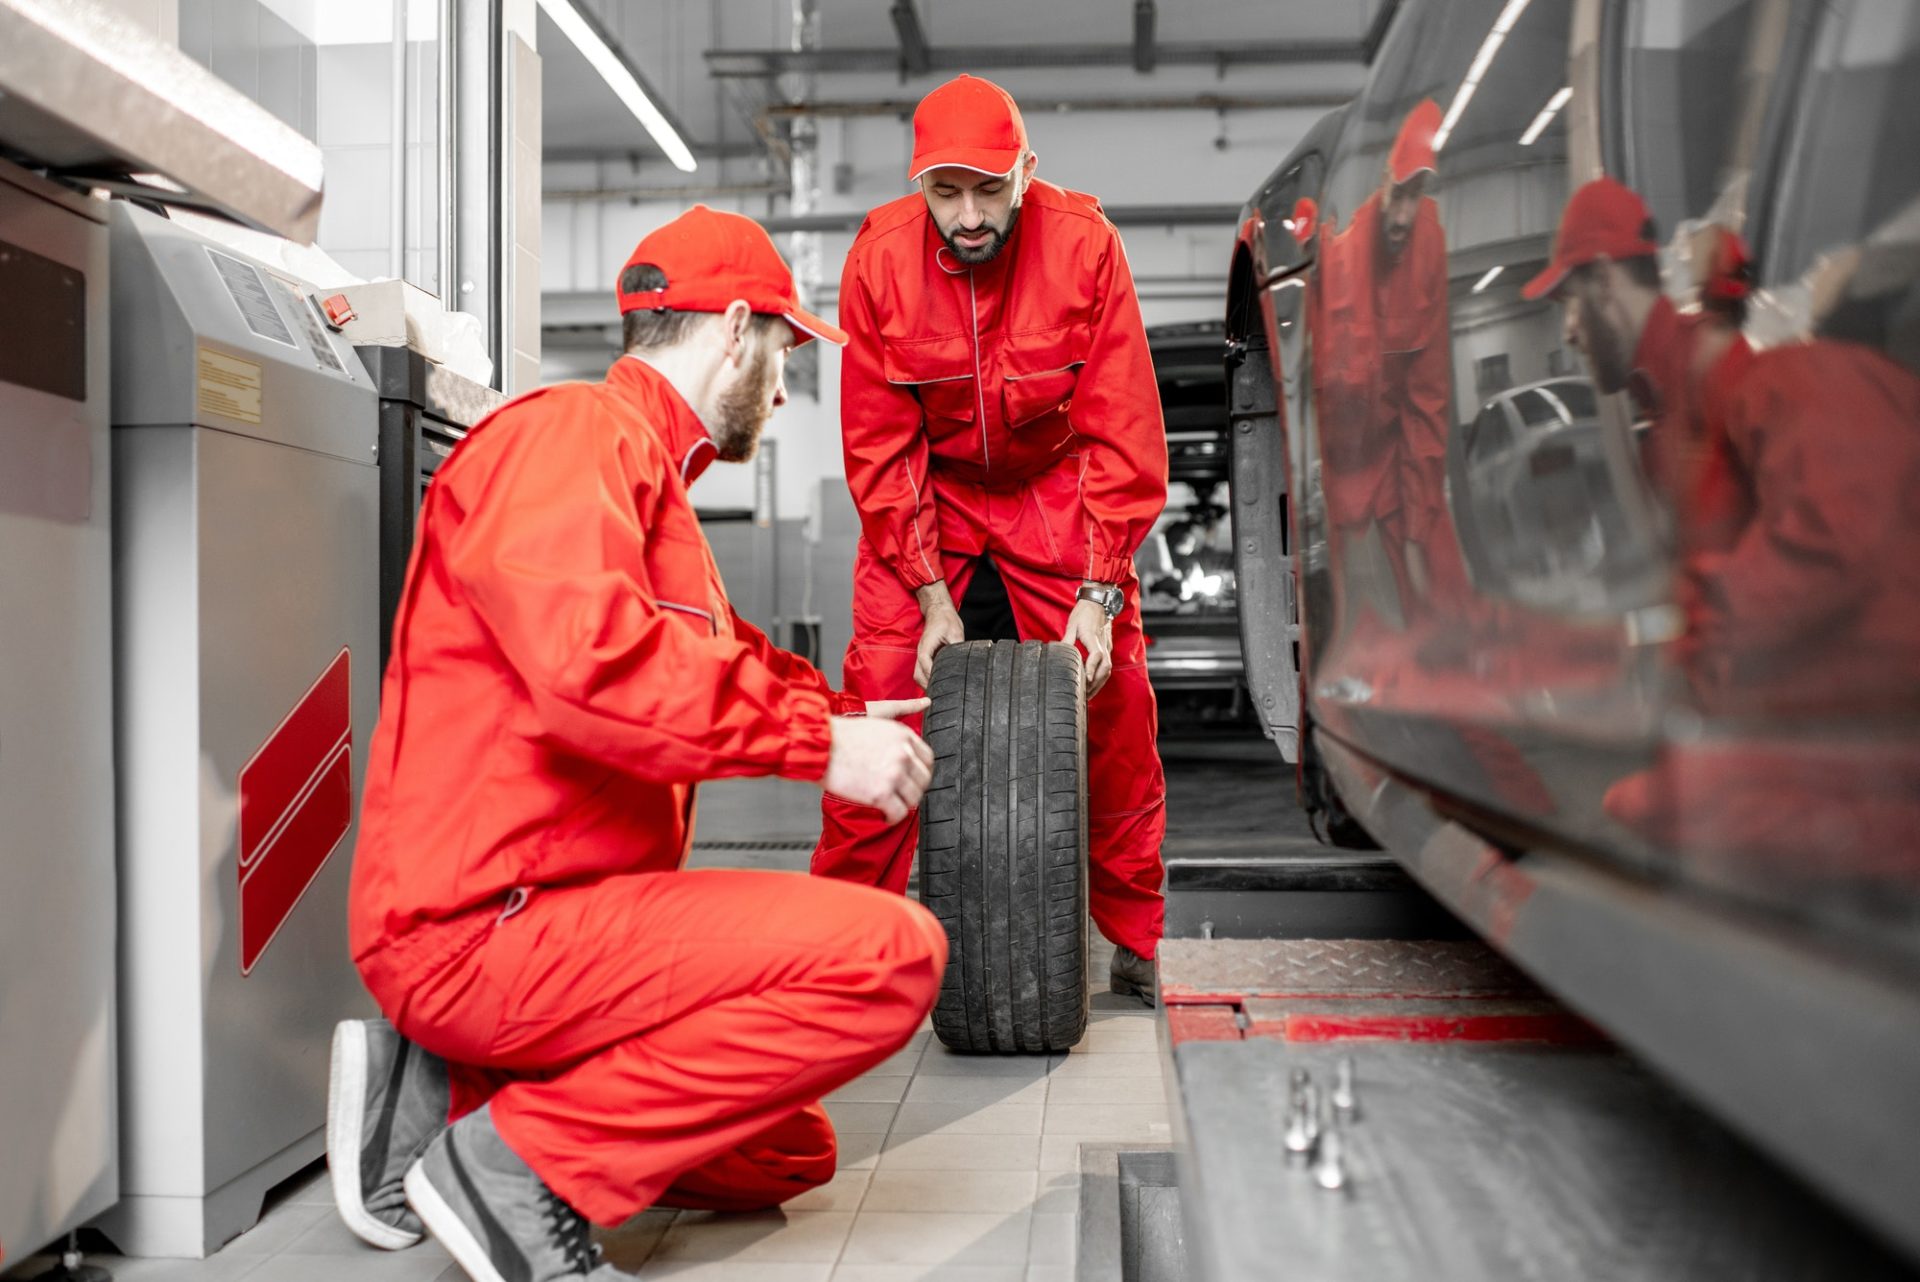 Workers changing wheels at the car service